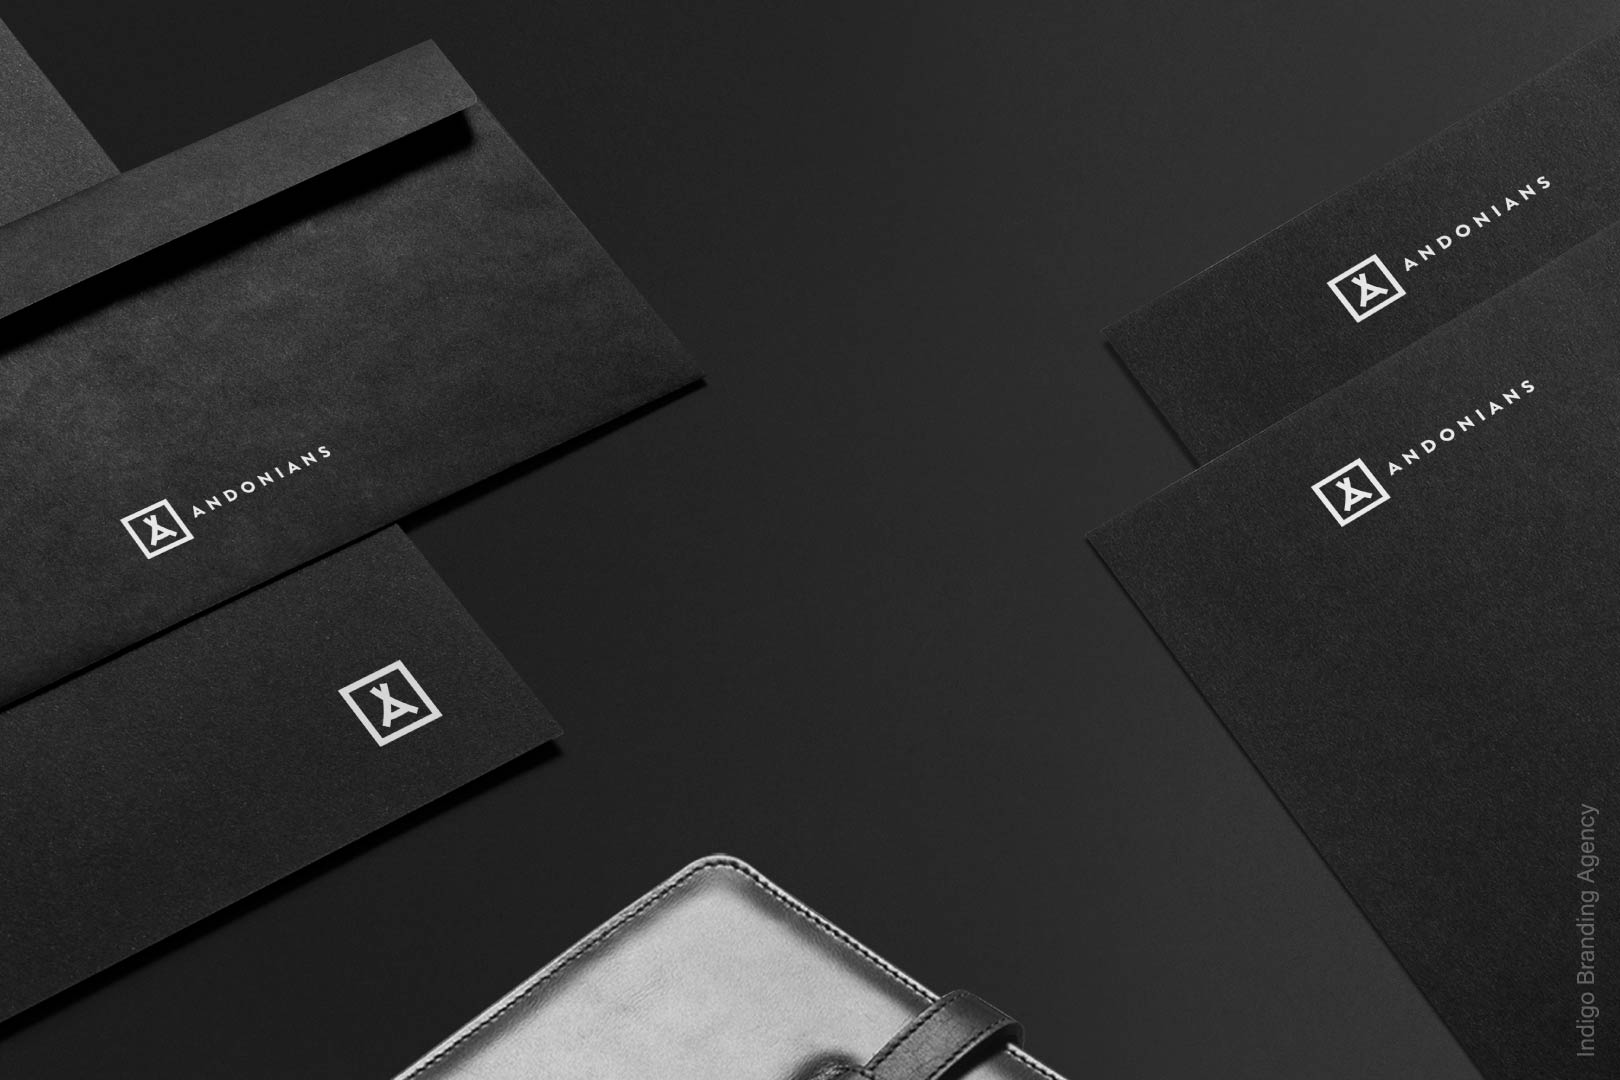 Andonians branding and visit card design by Indigo branding